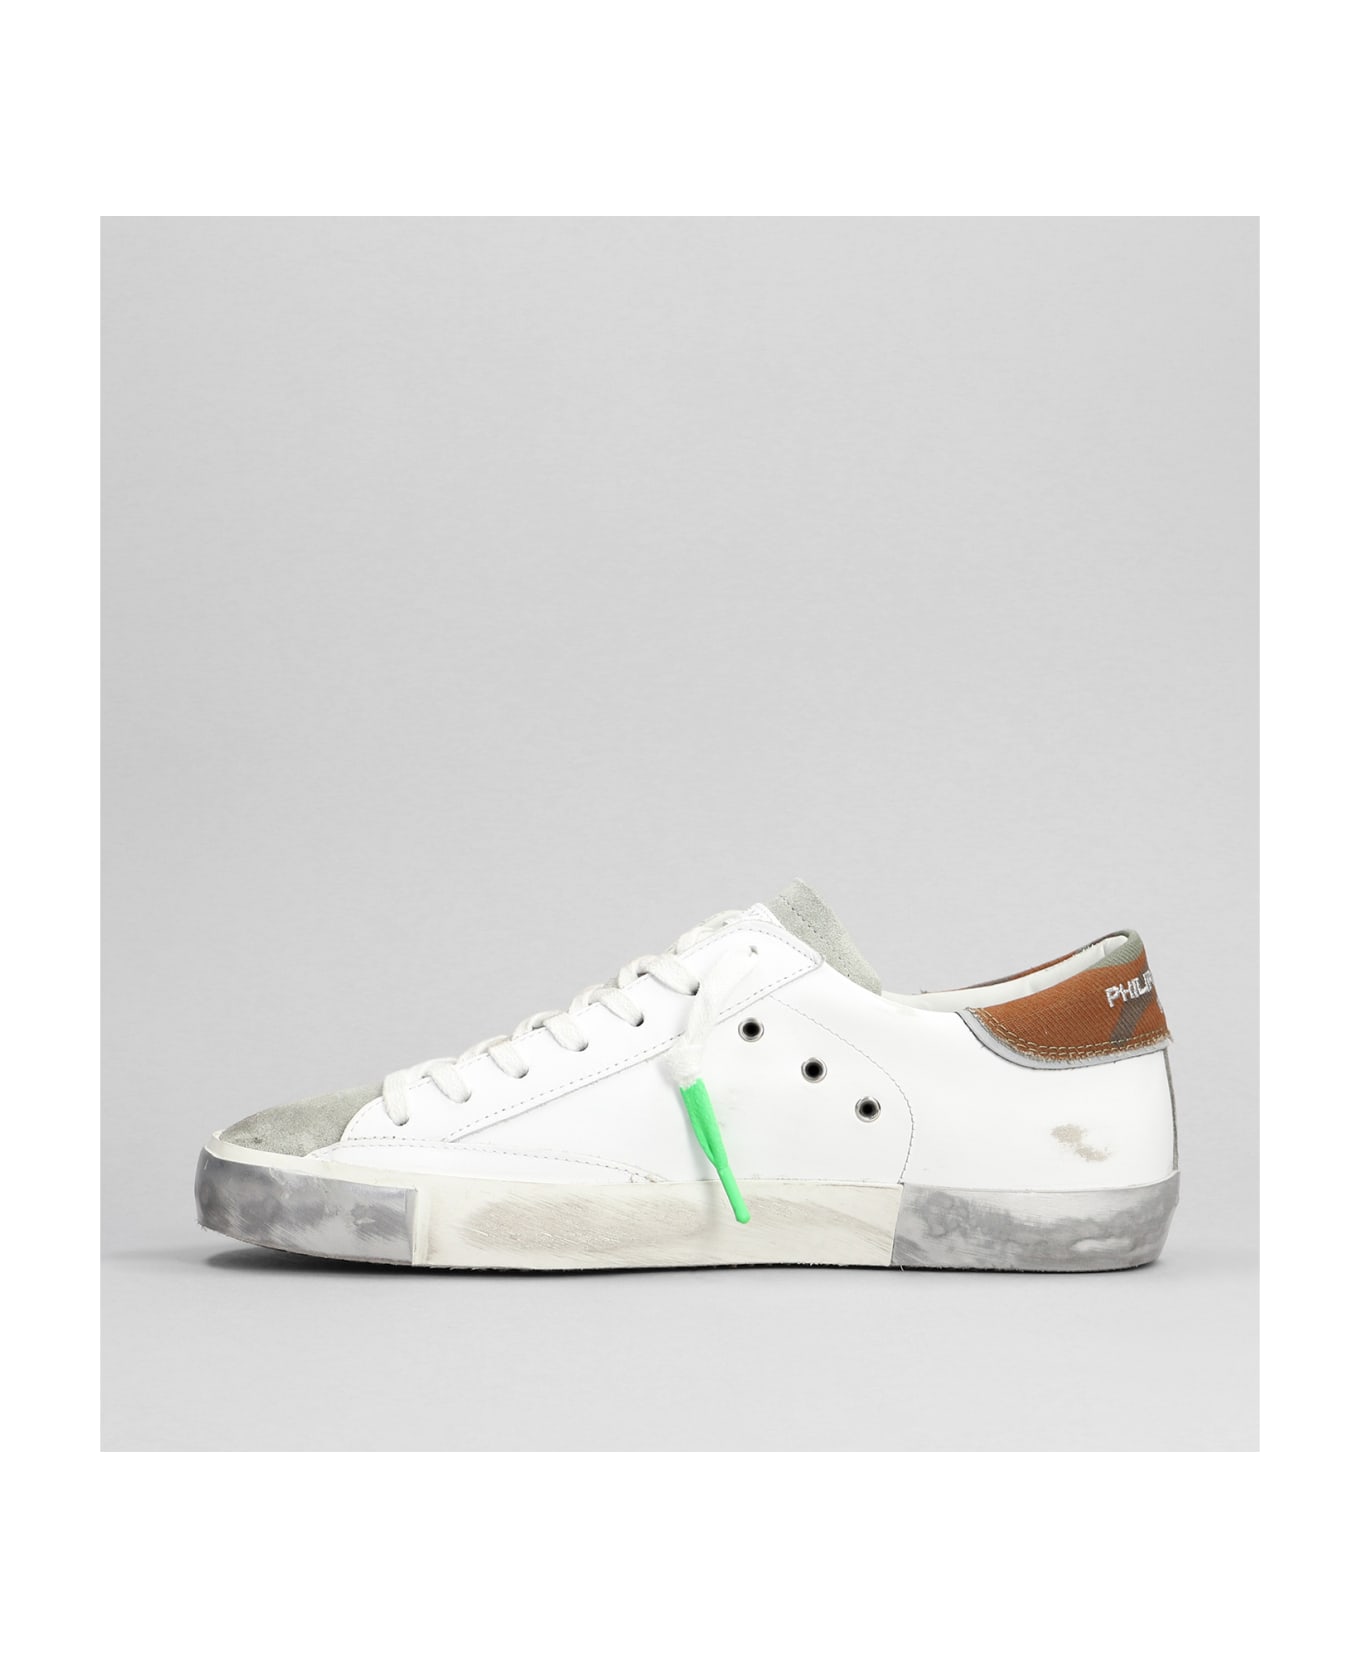 Philippe Model Prsx Low Sneakers In White Leather - white